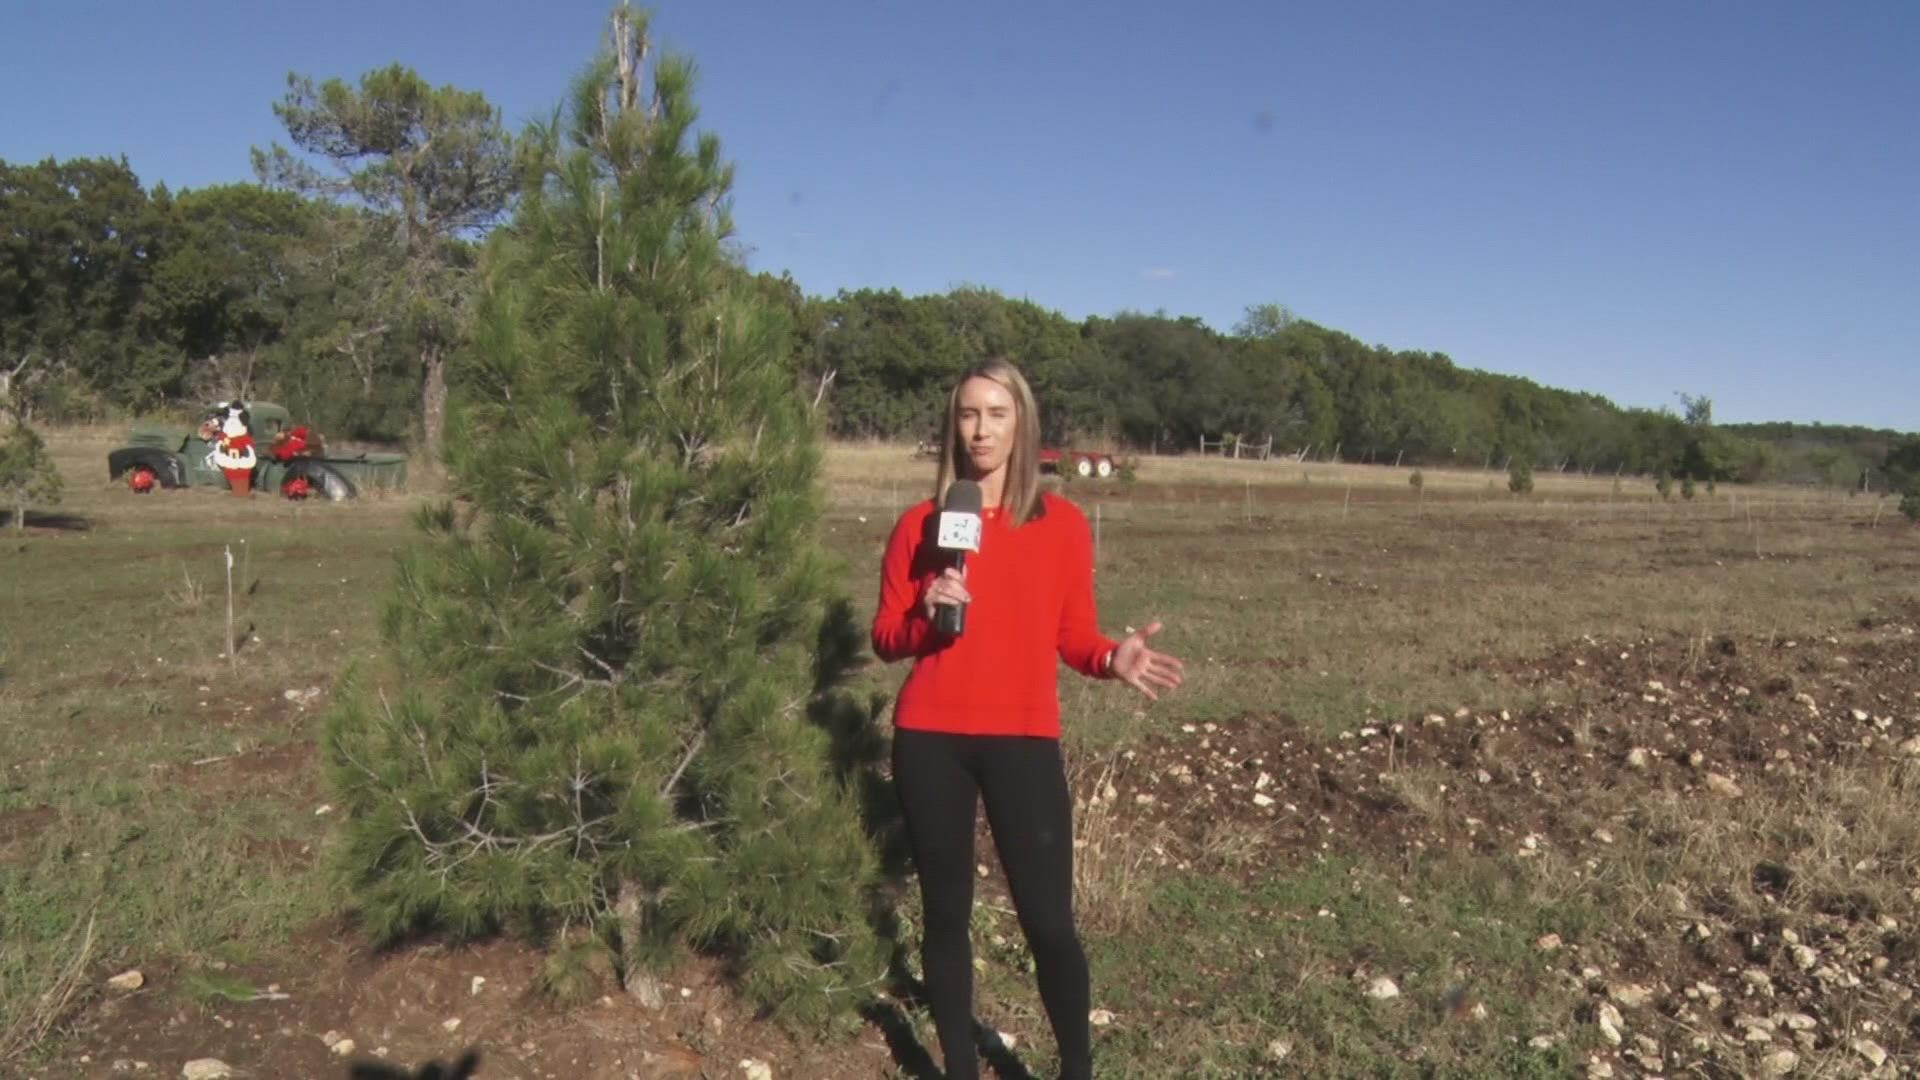 Co-owners, Kathy and Kenneth Radde, made the difficult decision to shut down the Christmas tree cutting field due to drought and weather conditions in Central Texas.